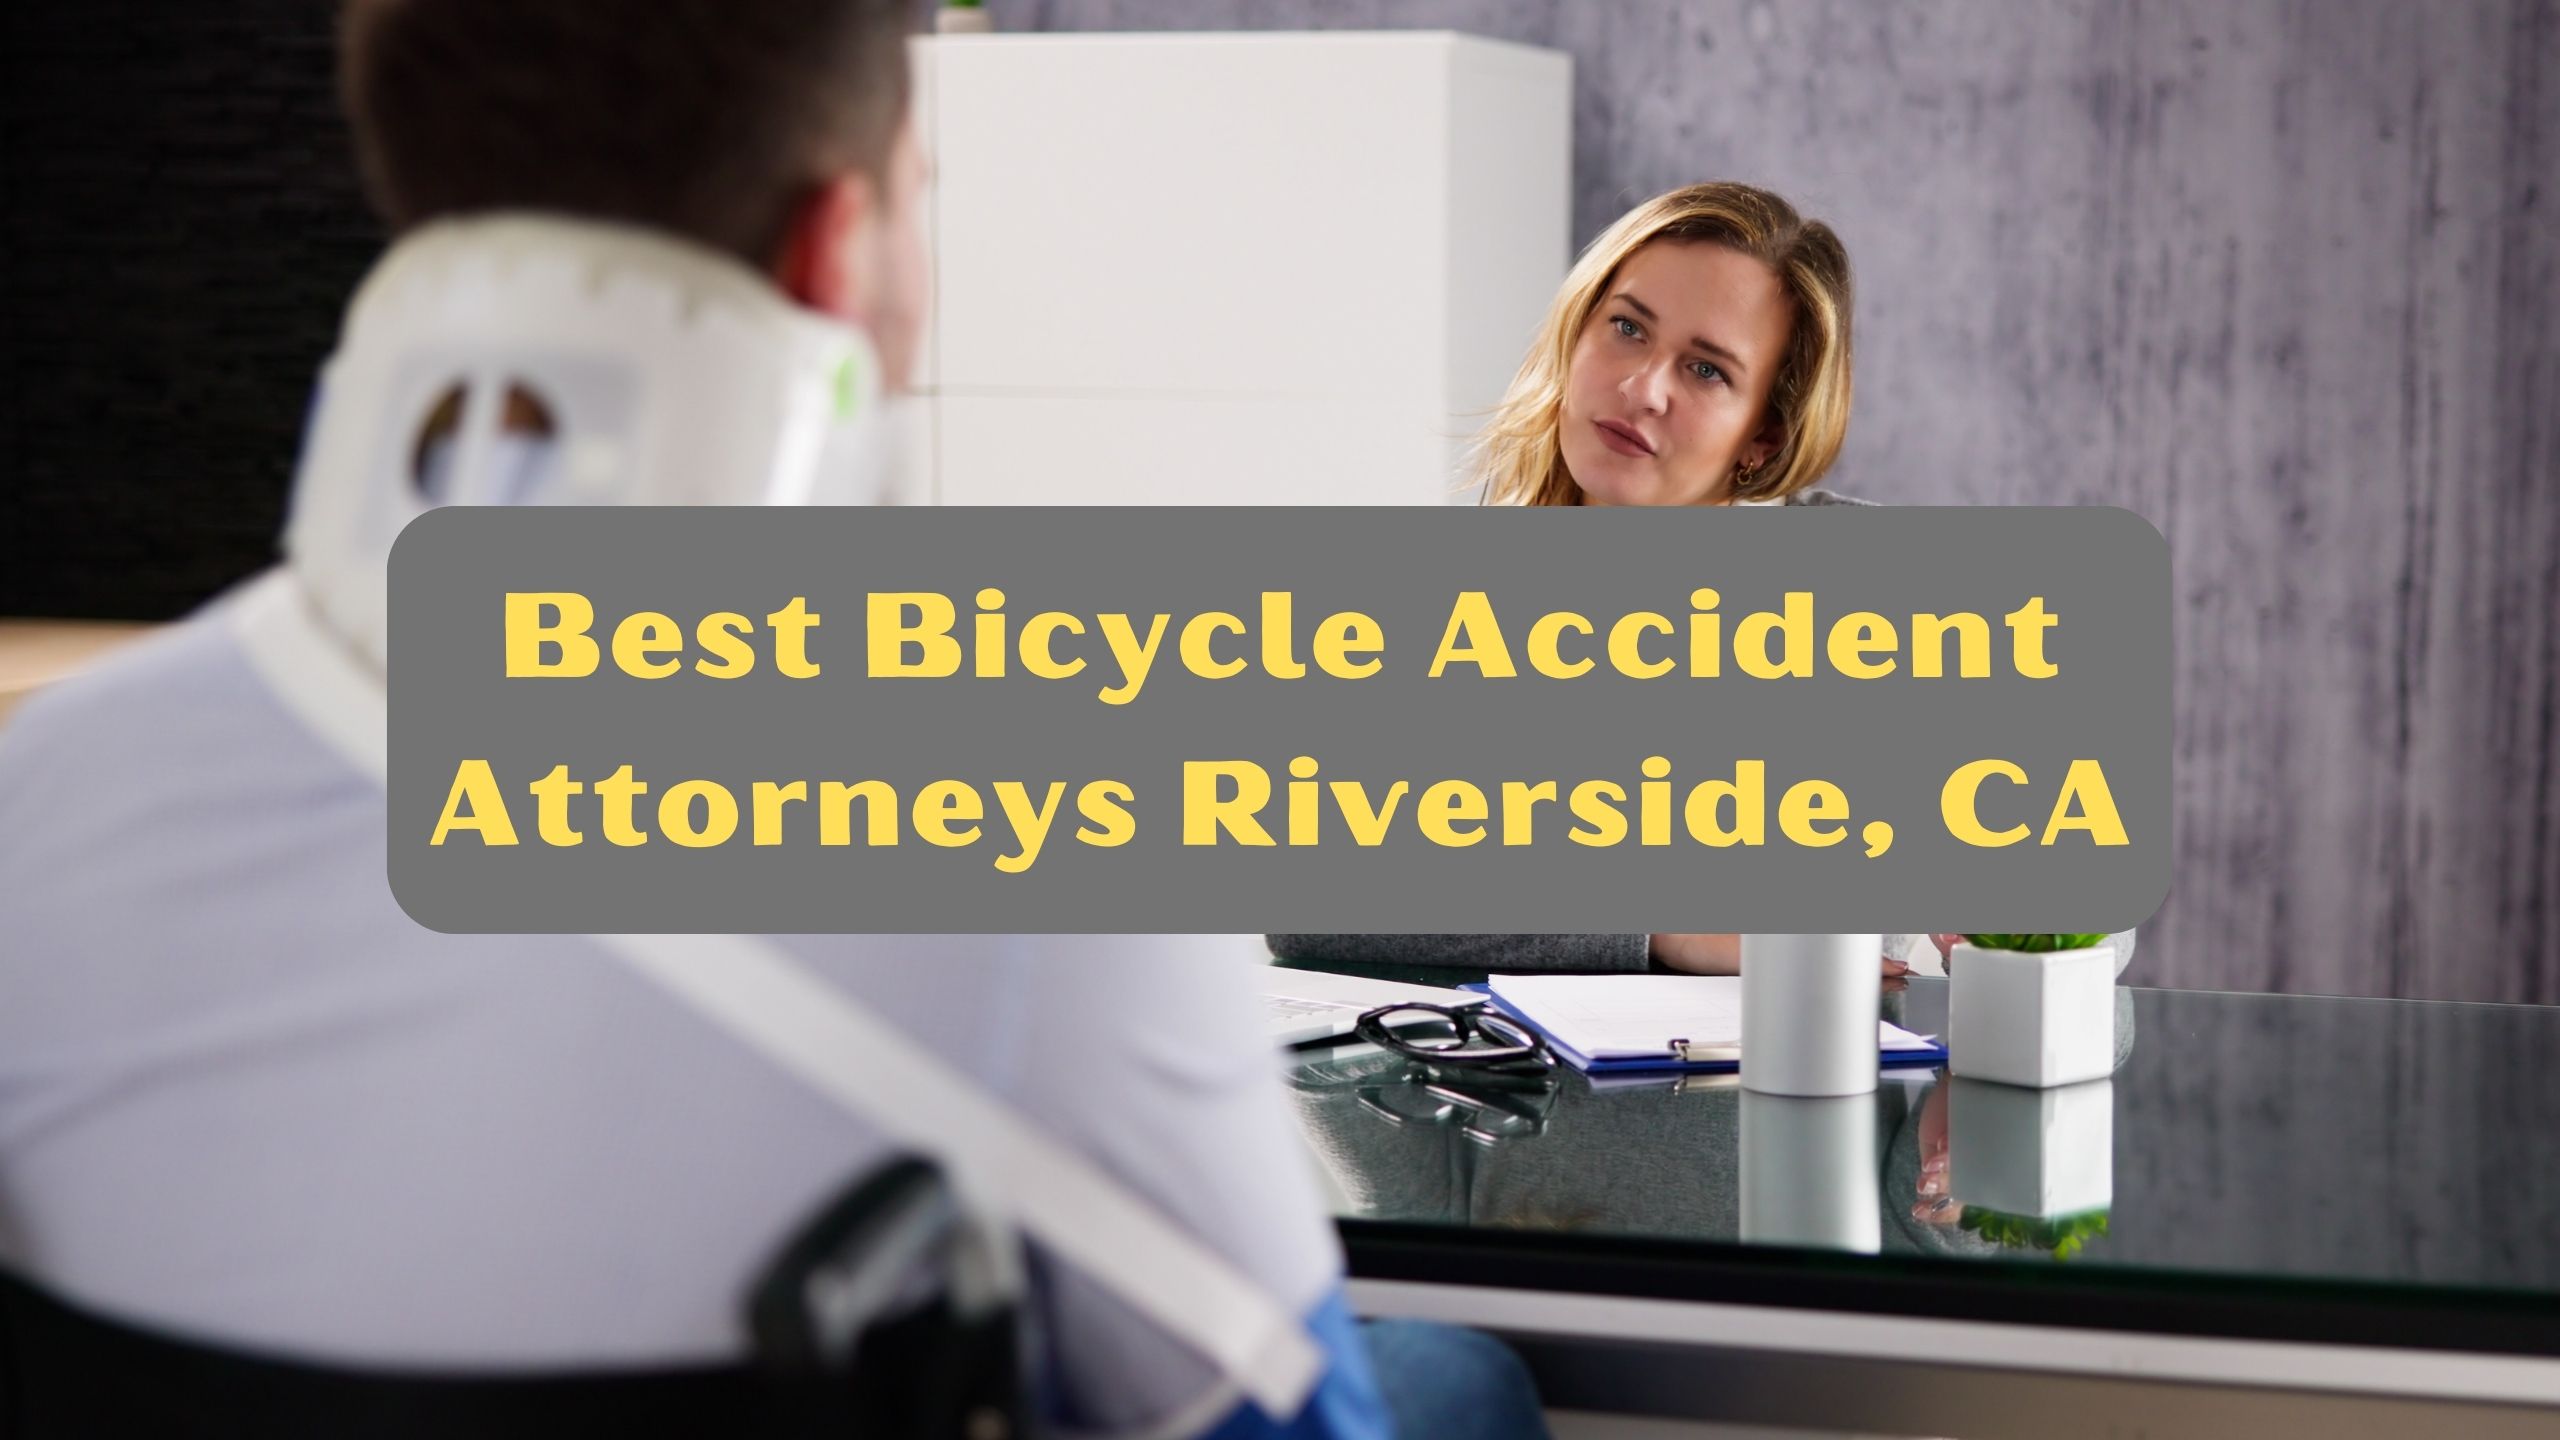 Best Bicycle Accident Attorneys Riverside